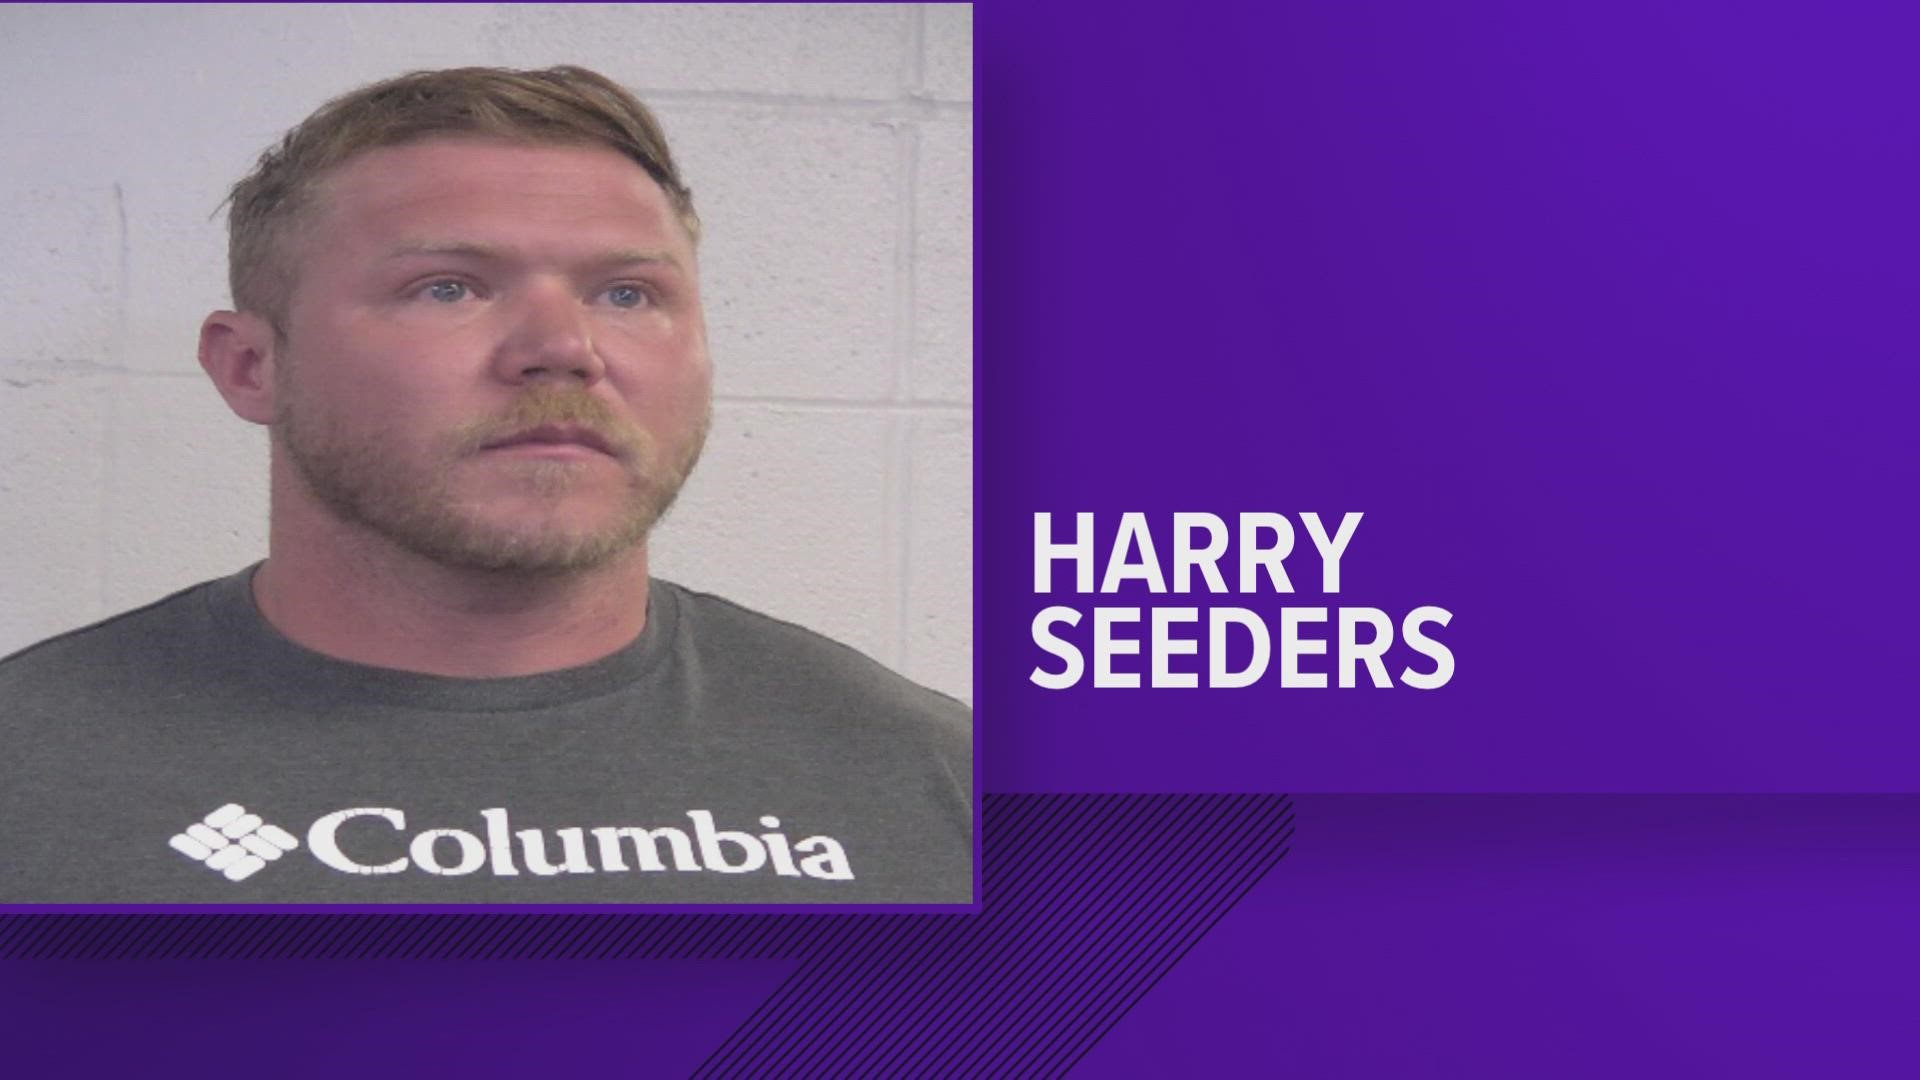 Harry Seeders was ordered to undergo a mental health assessment, forfeit his law enforcement certification and he's to receive no jail time.